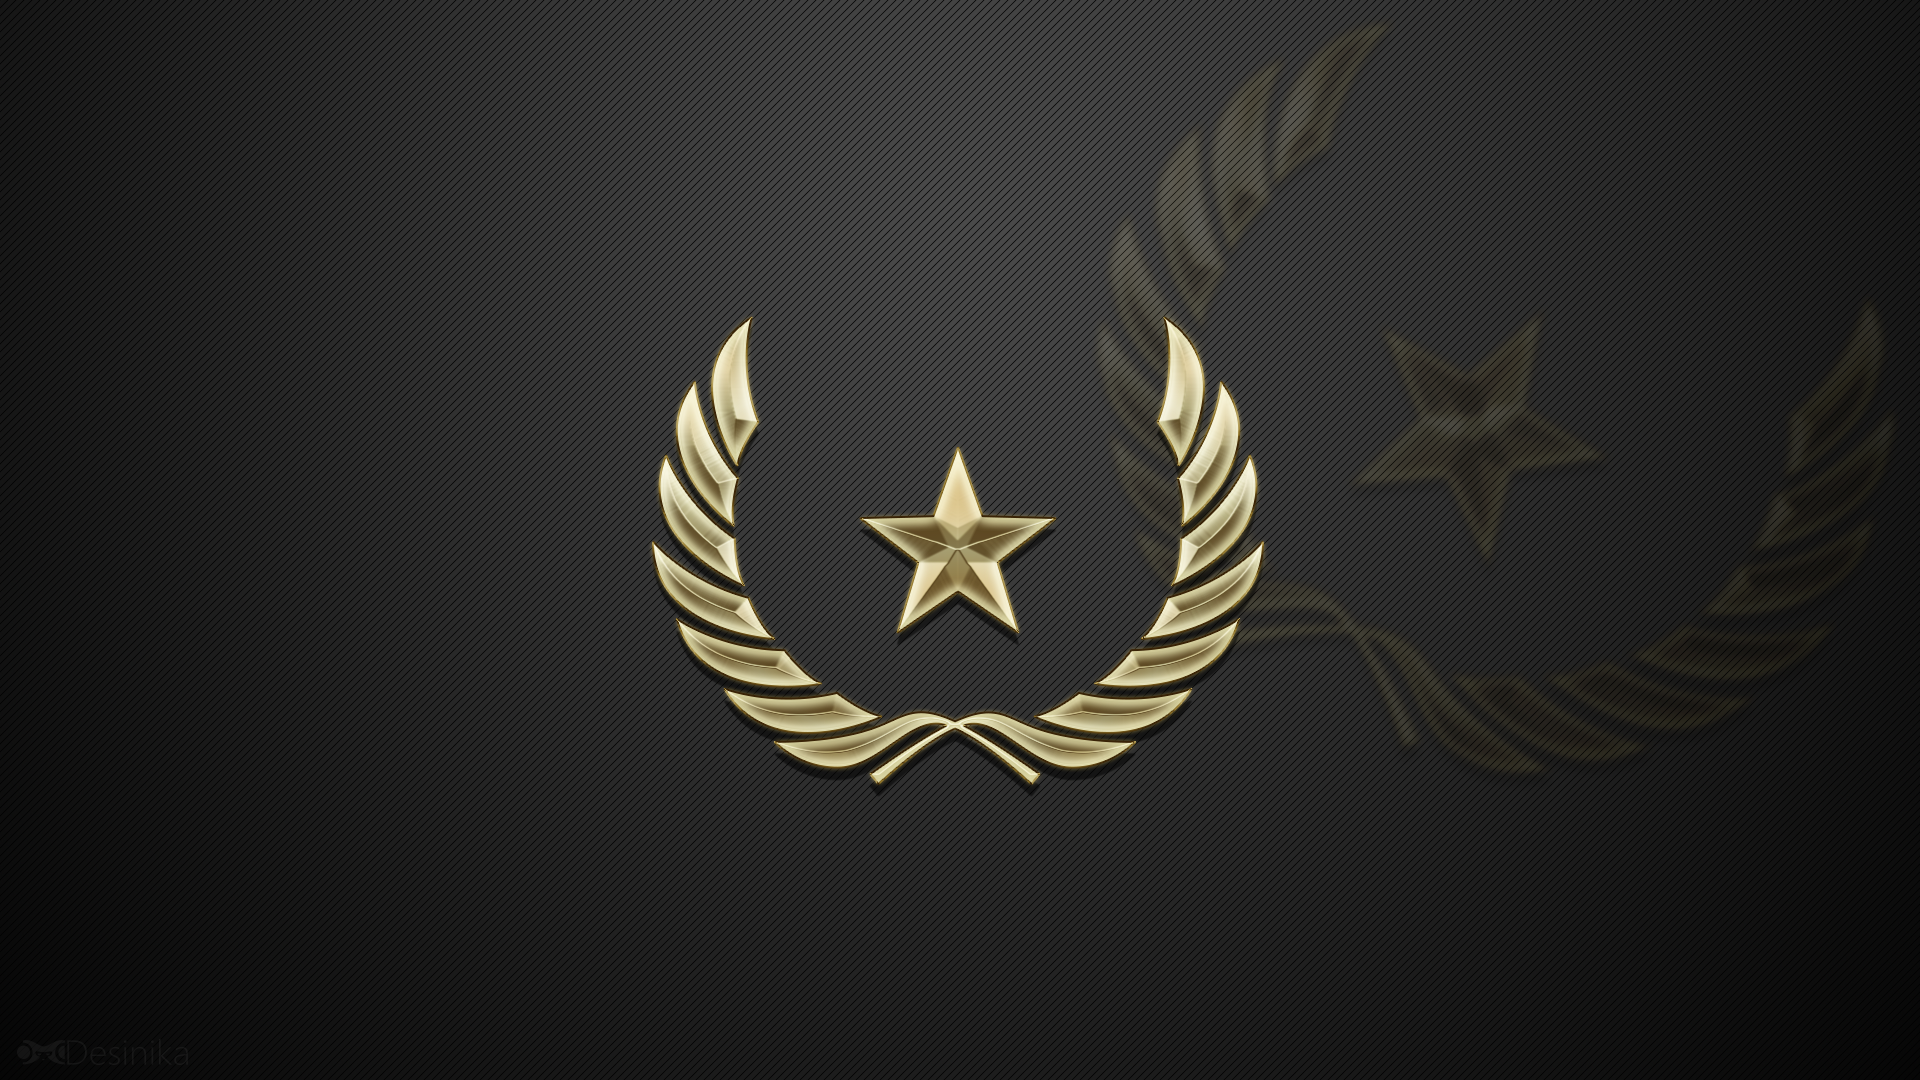 General 1920x1080 Counter-Strike: Global Offensive PC gaming logo